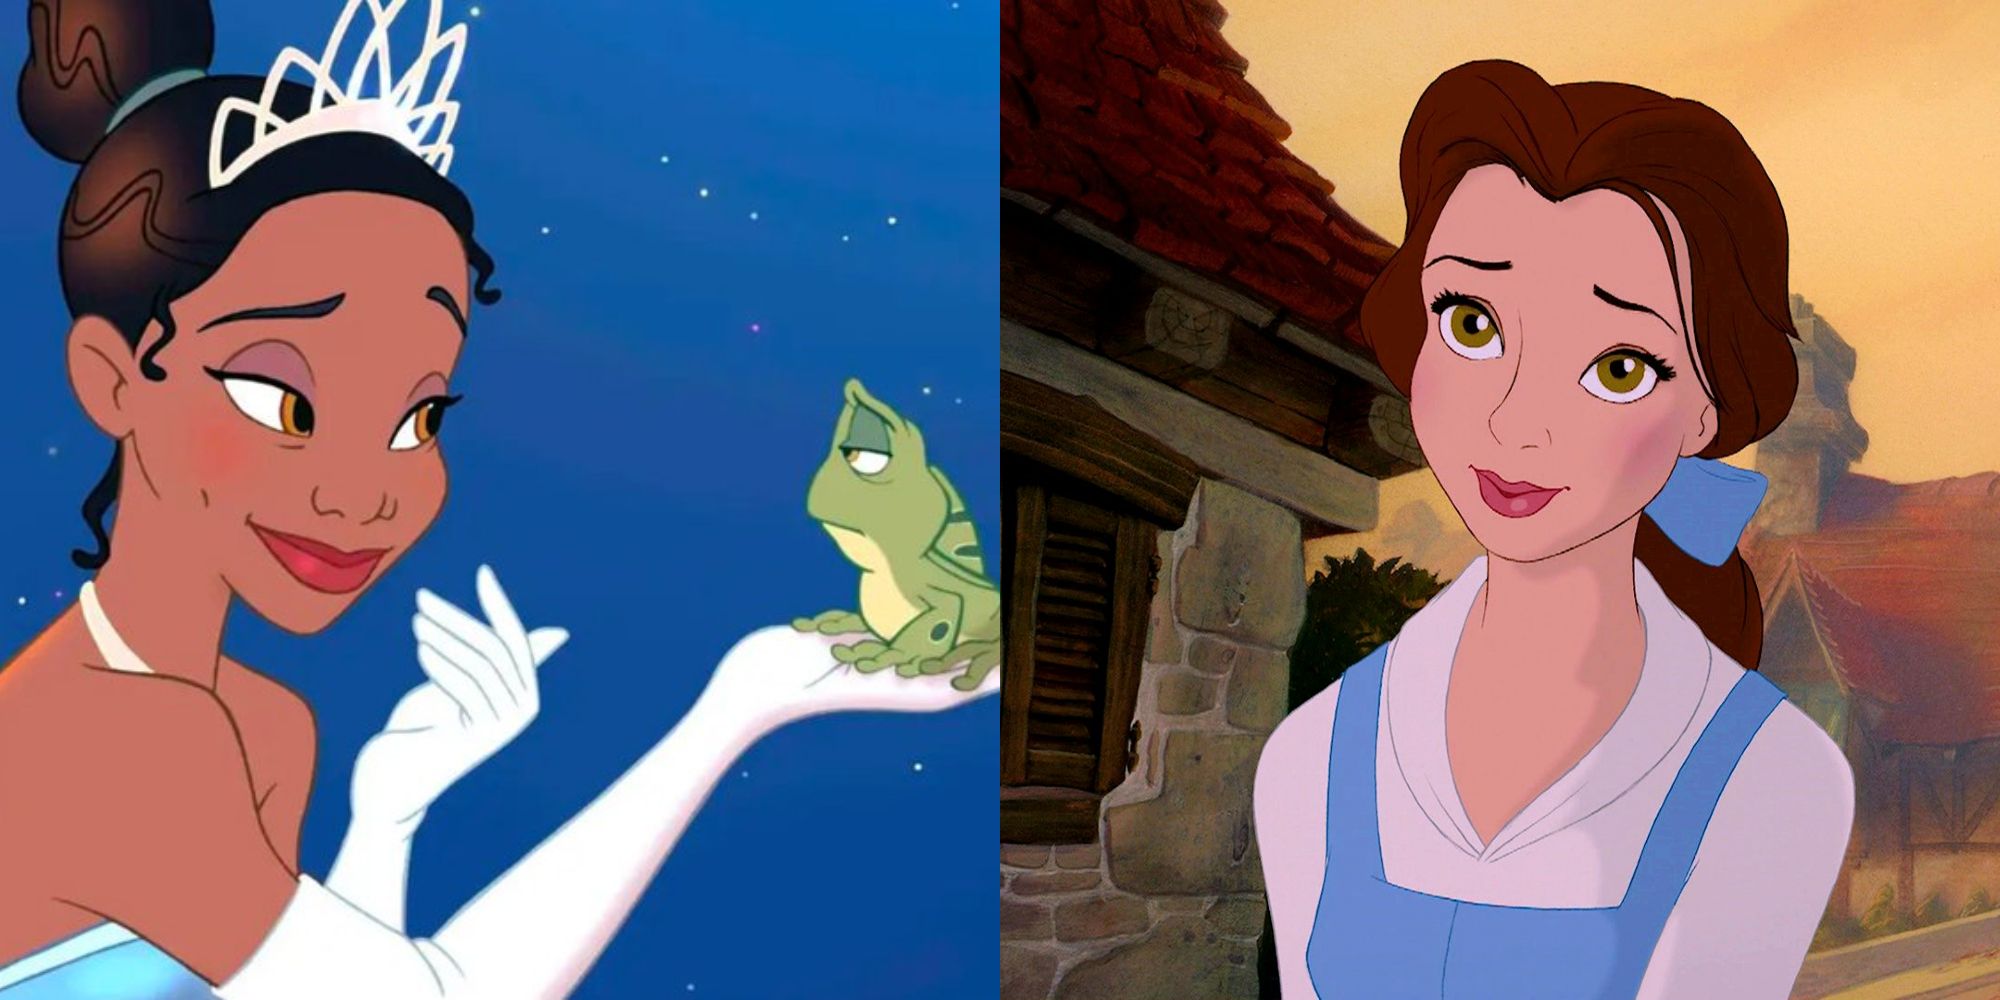 Split image: Tiana with the frog in her hand, Belle in her village